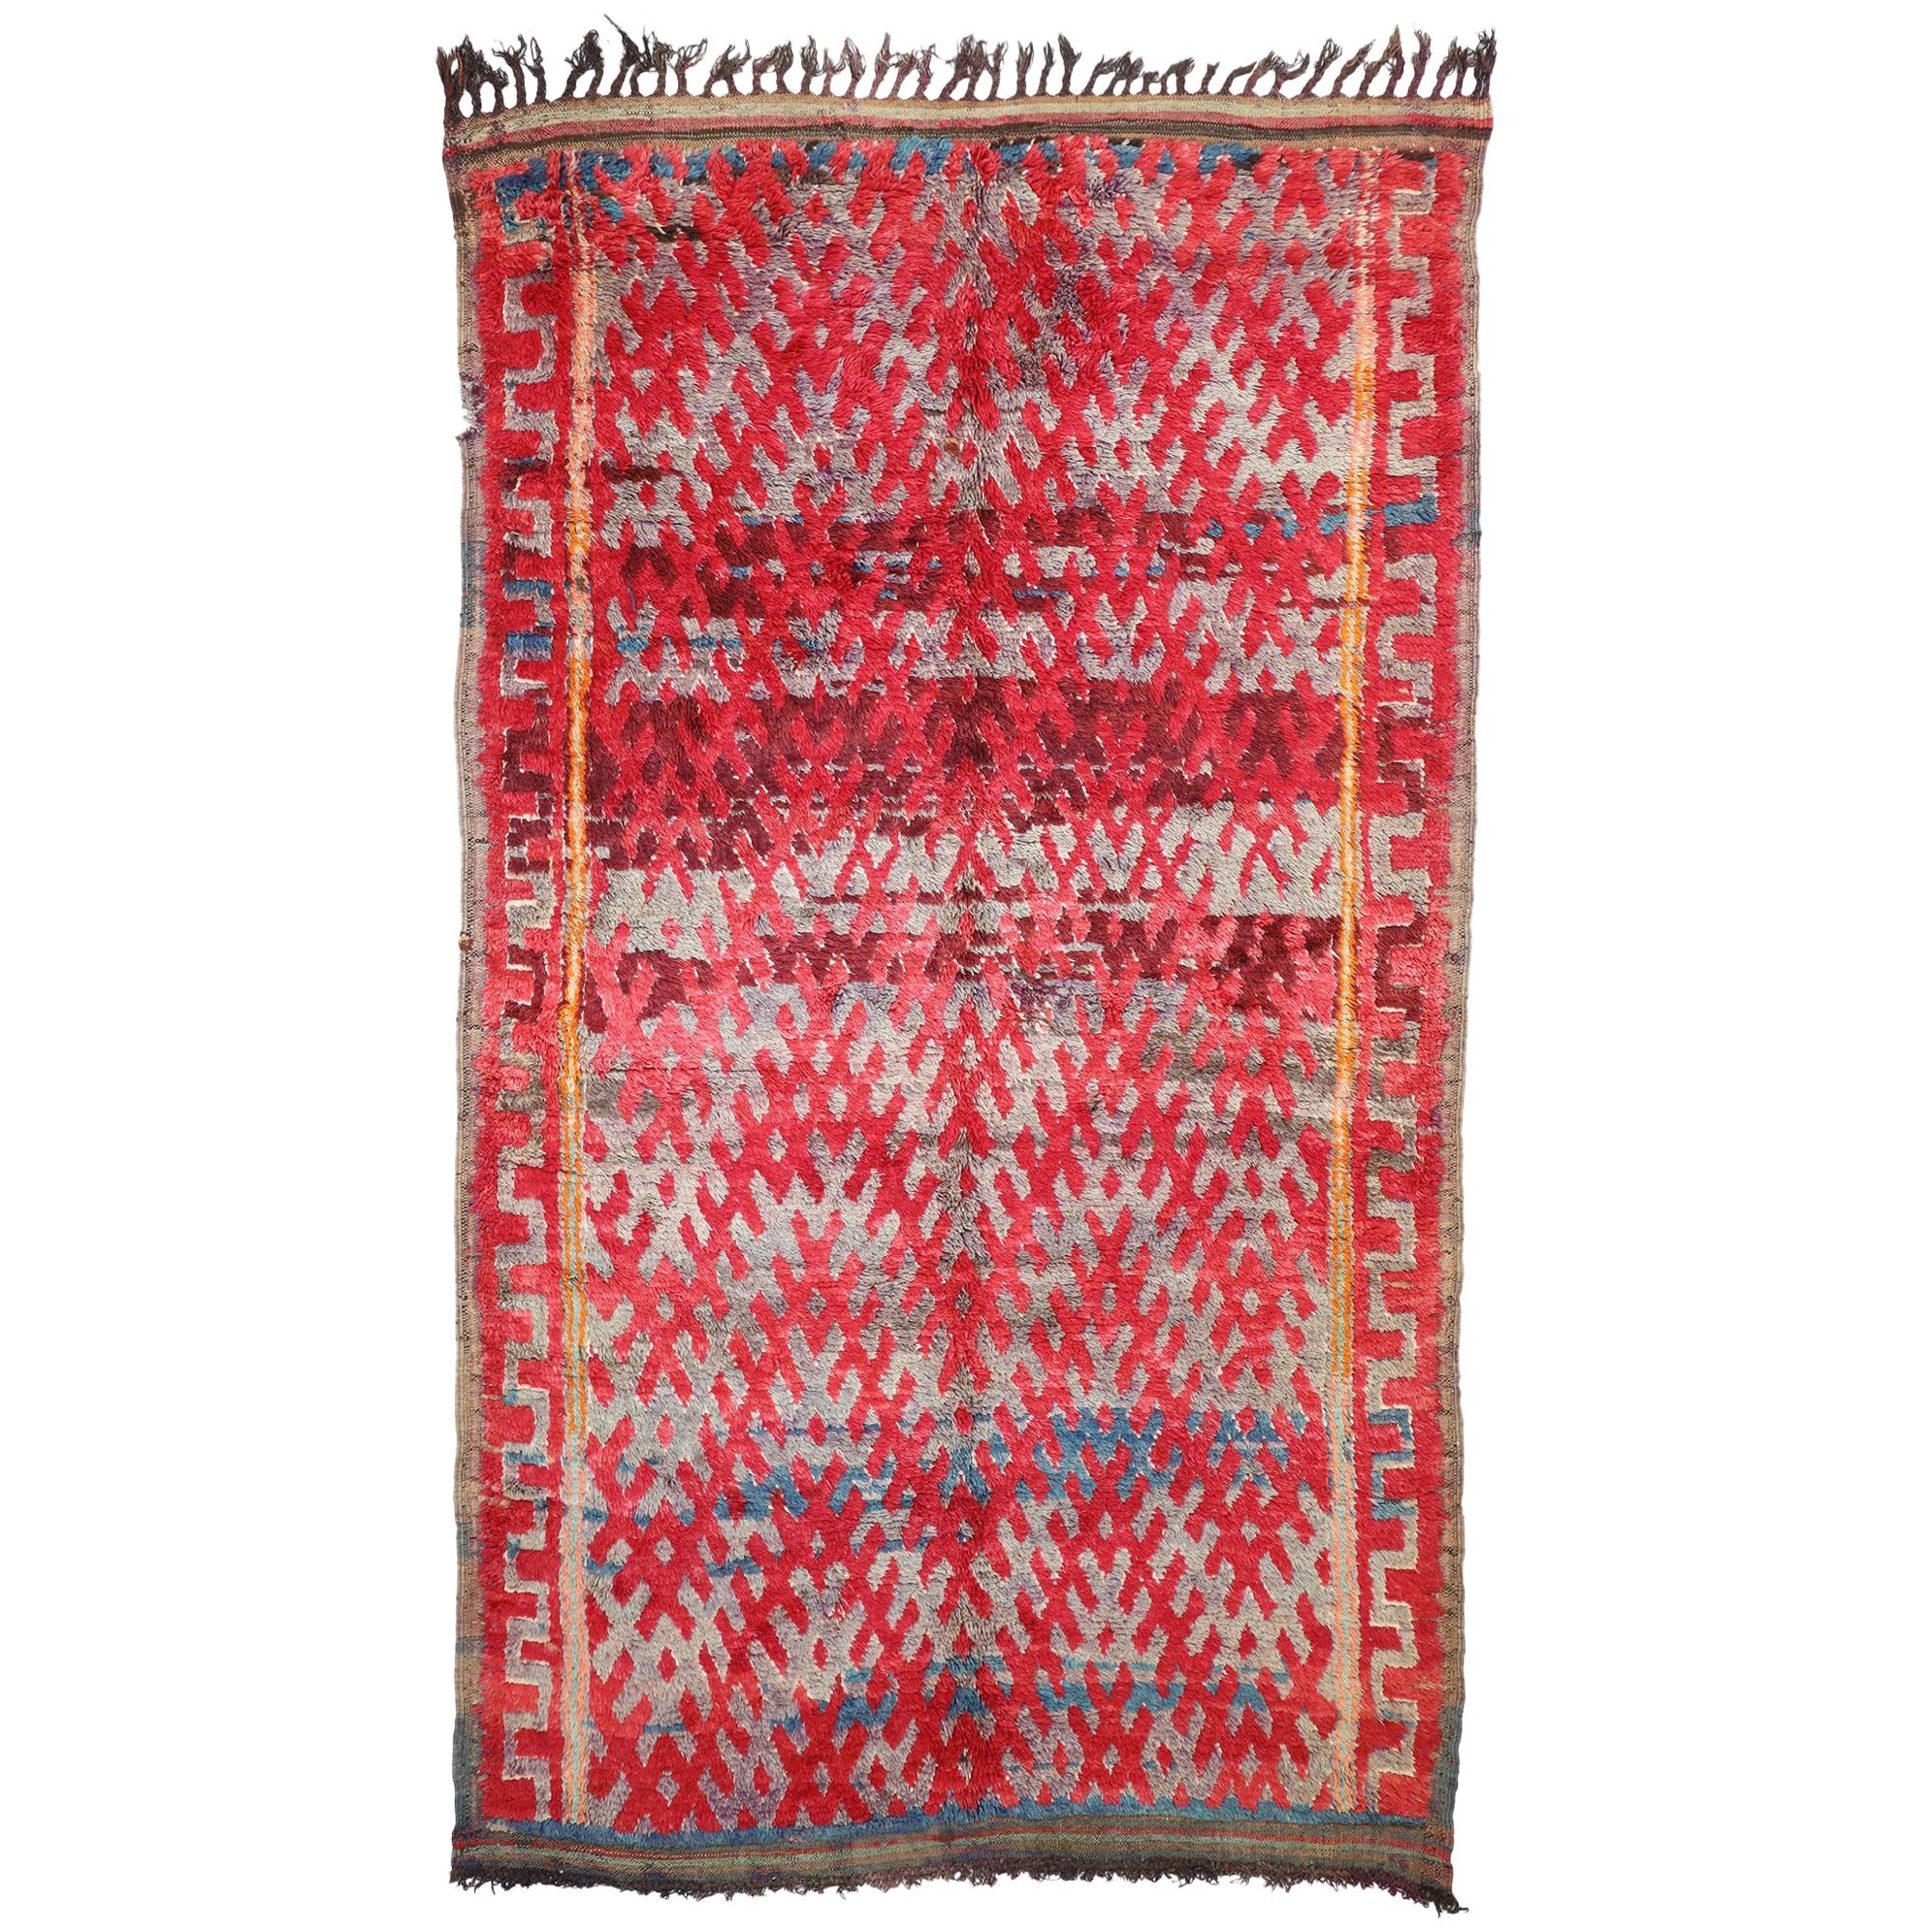 Vintage Moroccan Rug, Berber Moroccan Rug with Vibrant Mid-Century Modern Style